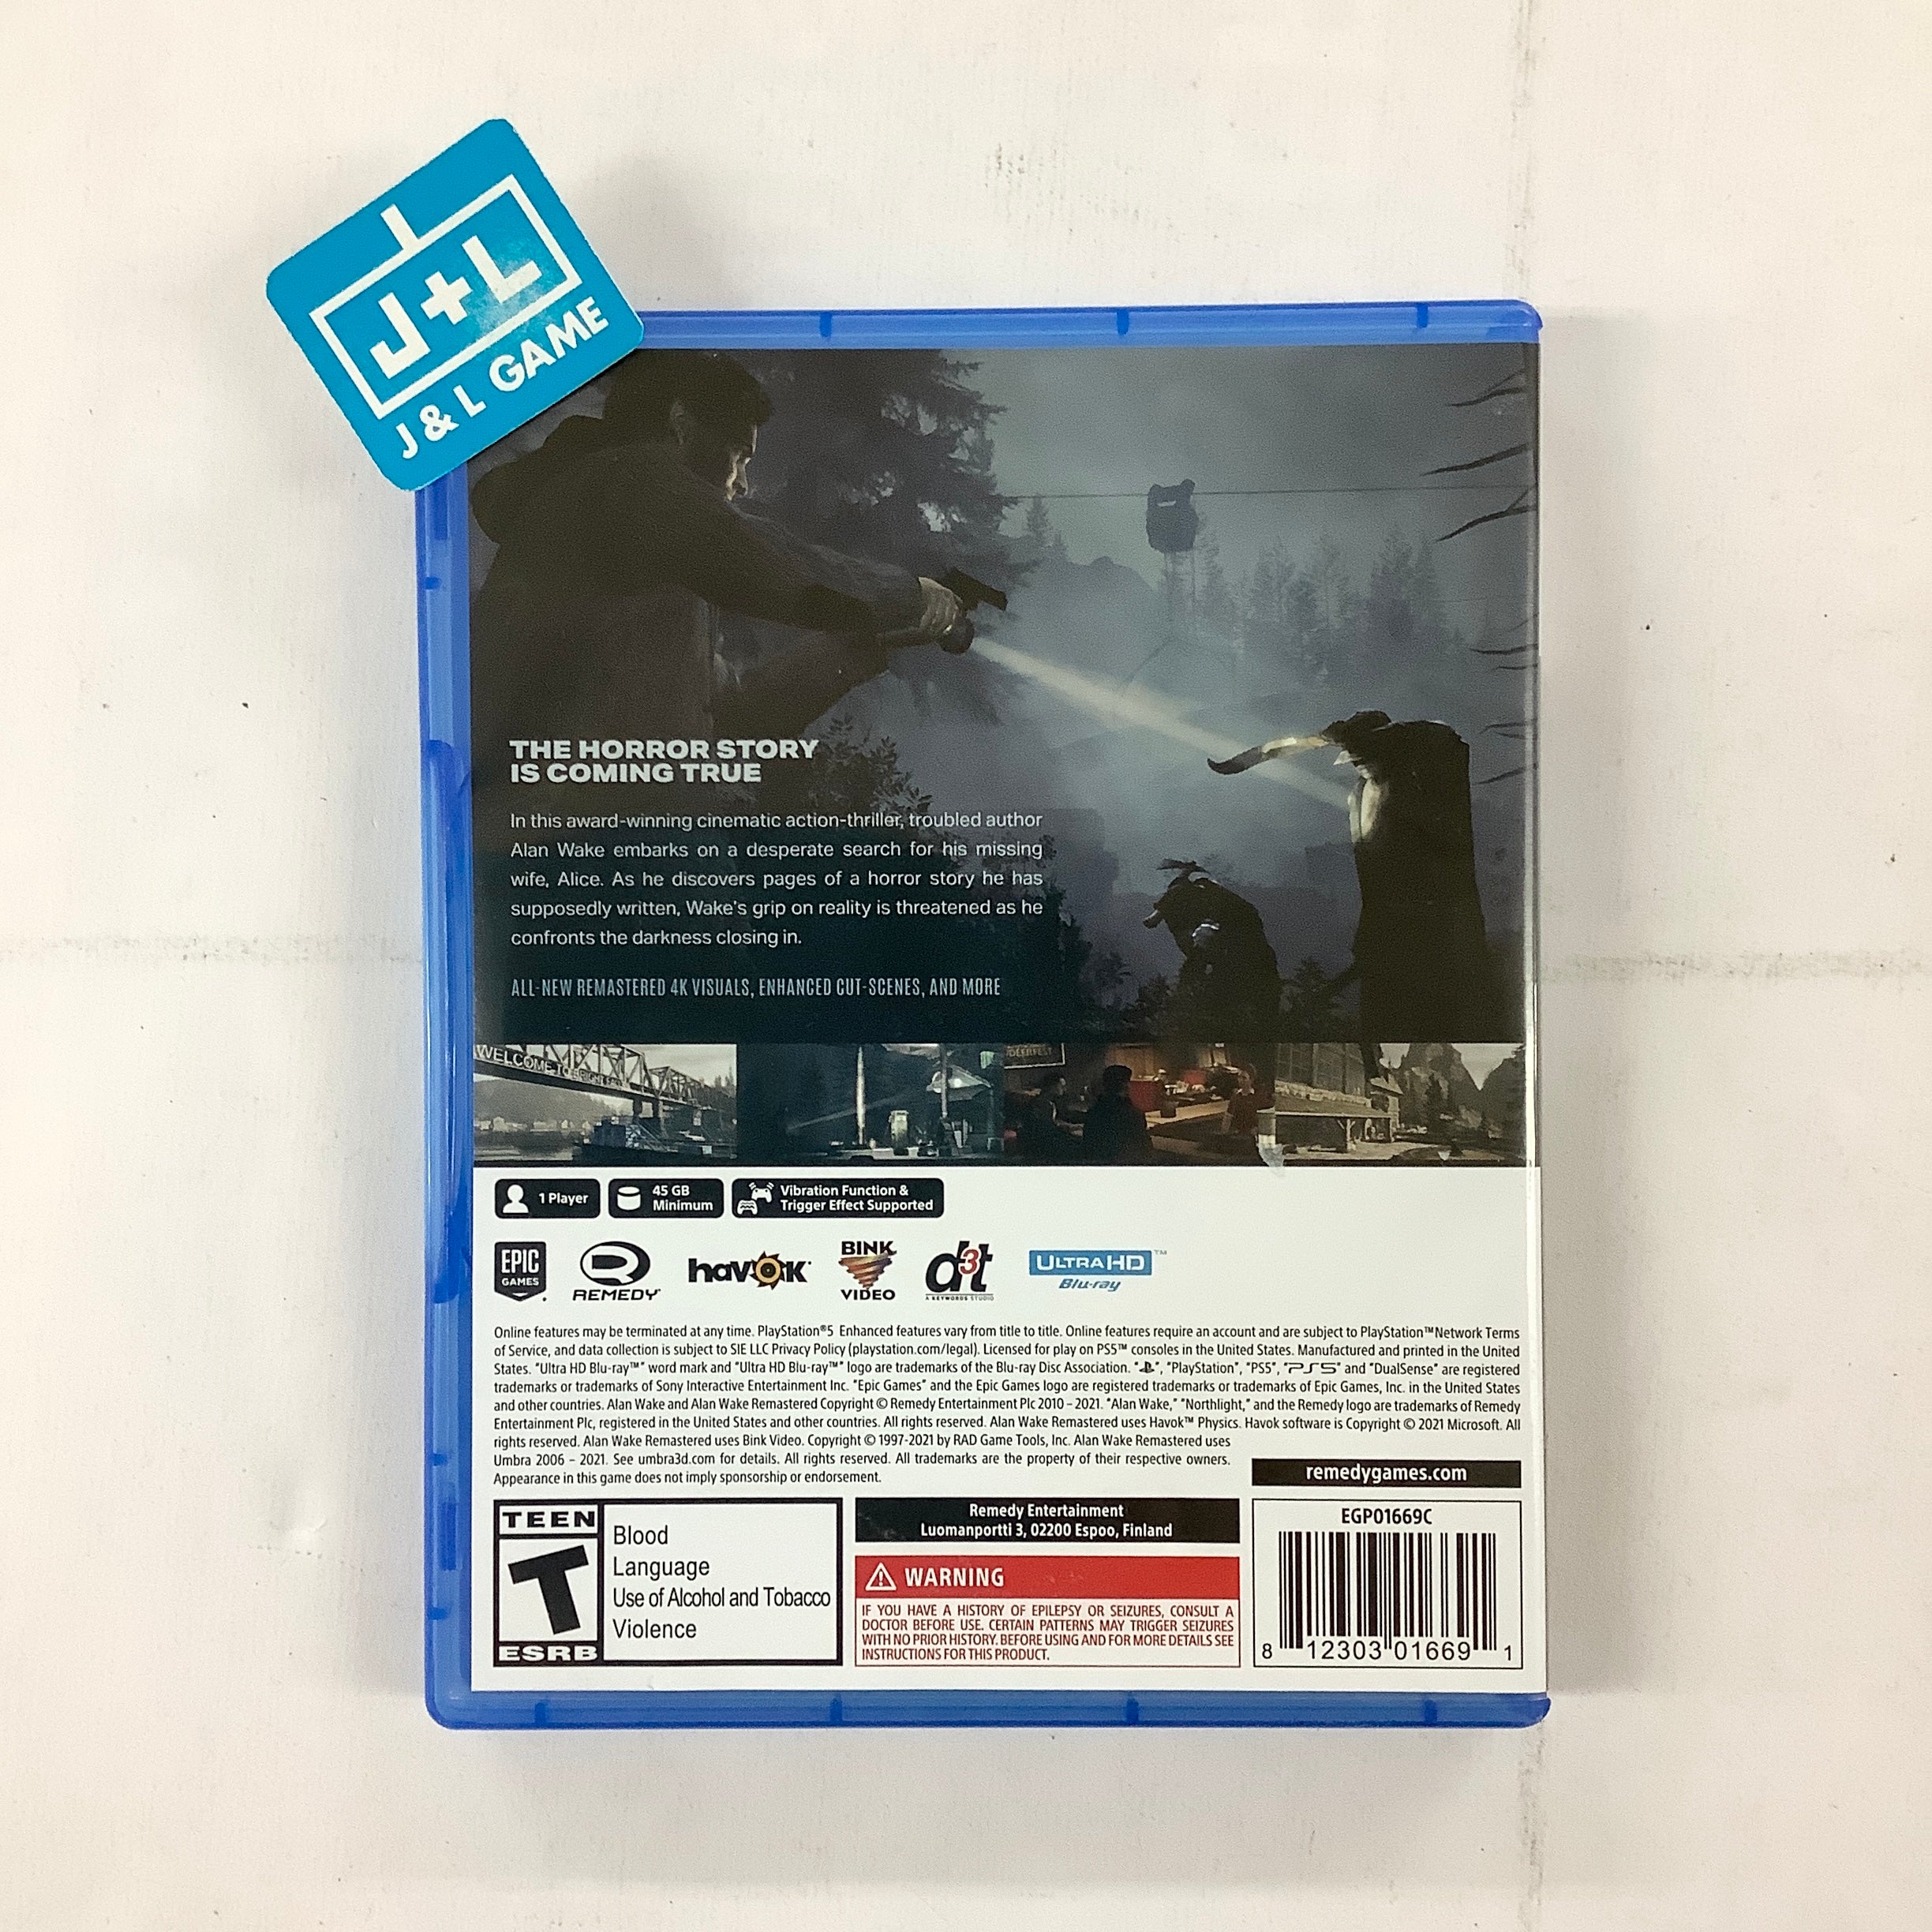 Alan Wake Remastered - (PS5) PlayStation 5 [Pre-Owned] Video Games Epic Games Publishing   